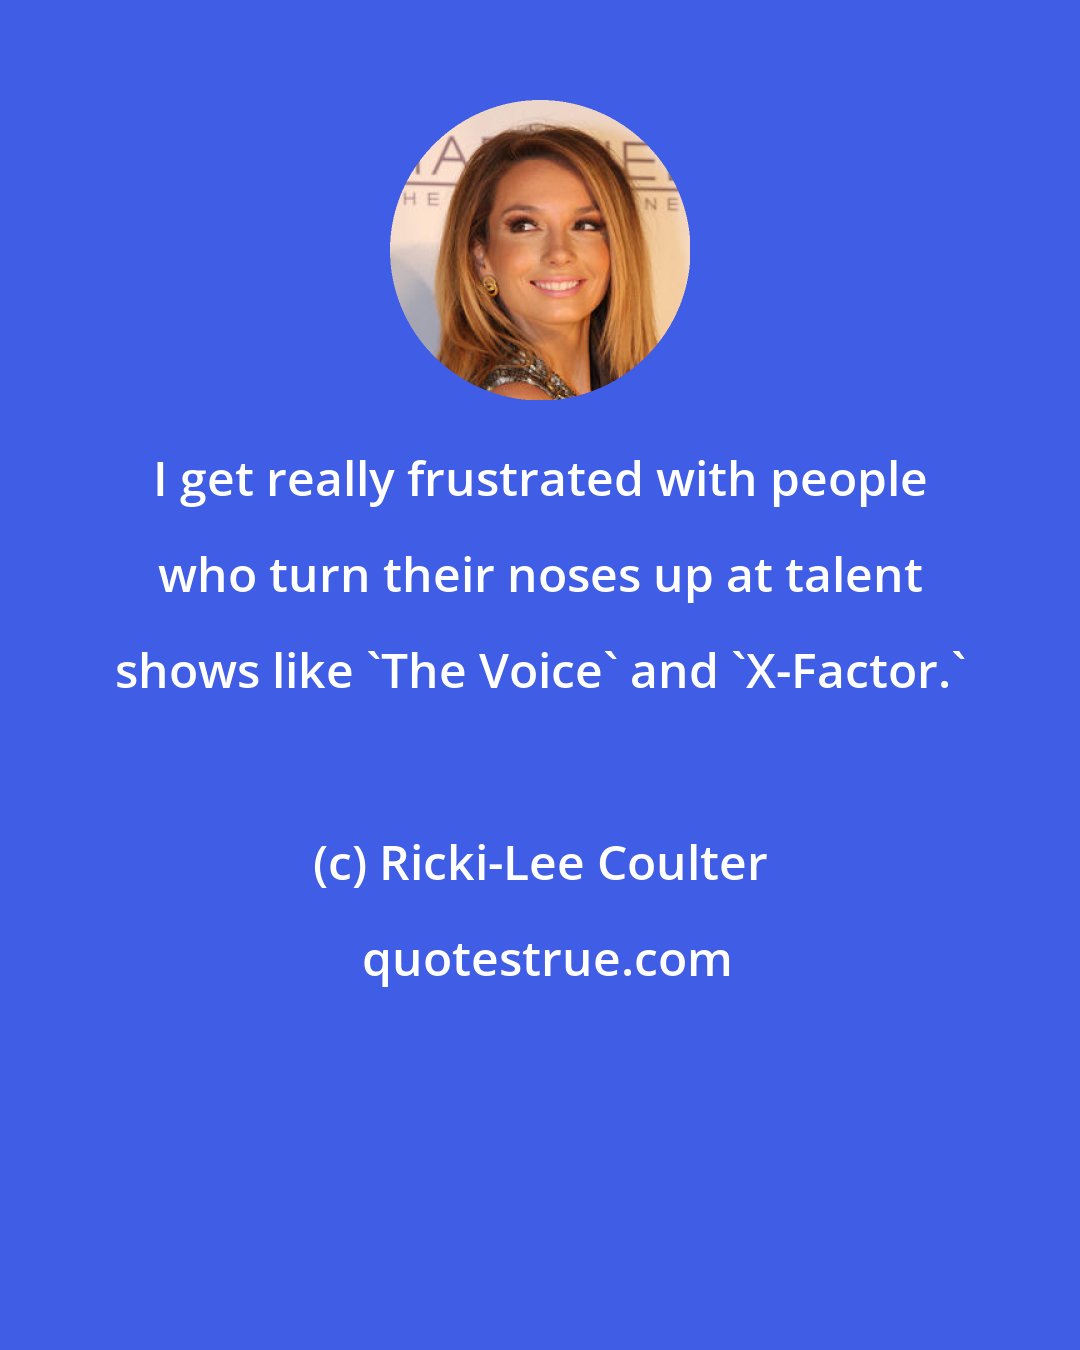 Ricki-Lee Coulter: I get really frustrated with people who turn their noses up at talent shows like 'The Voice' and 'X-Factor.'